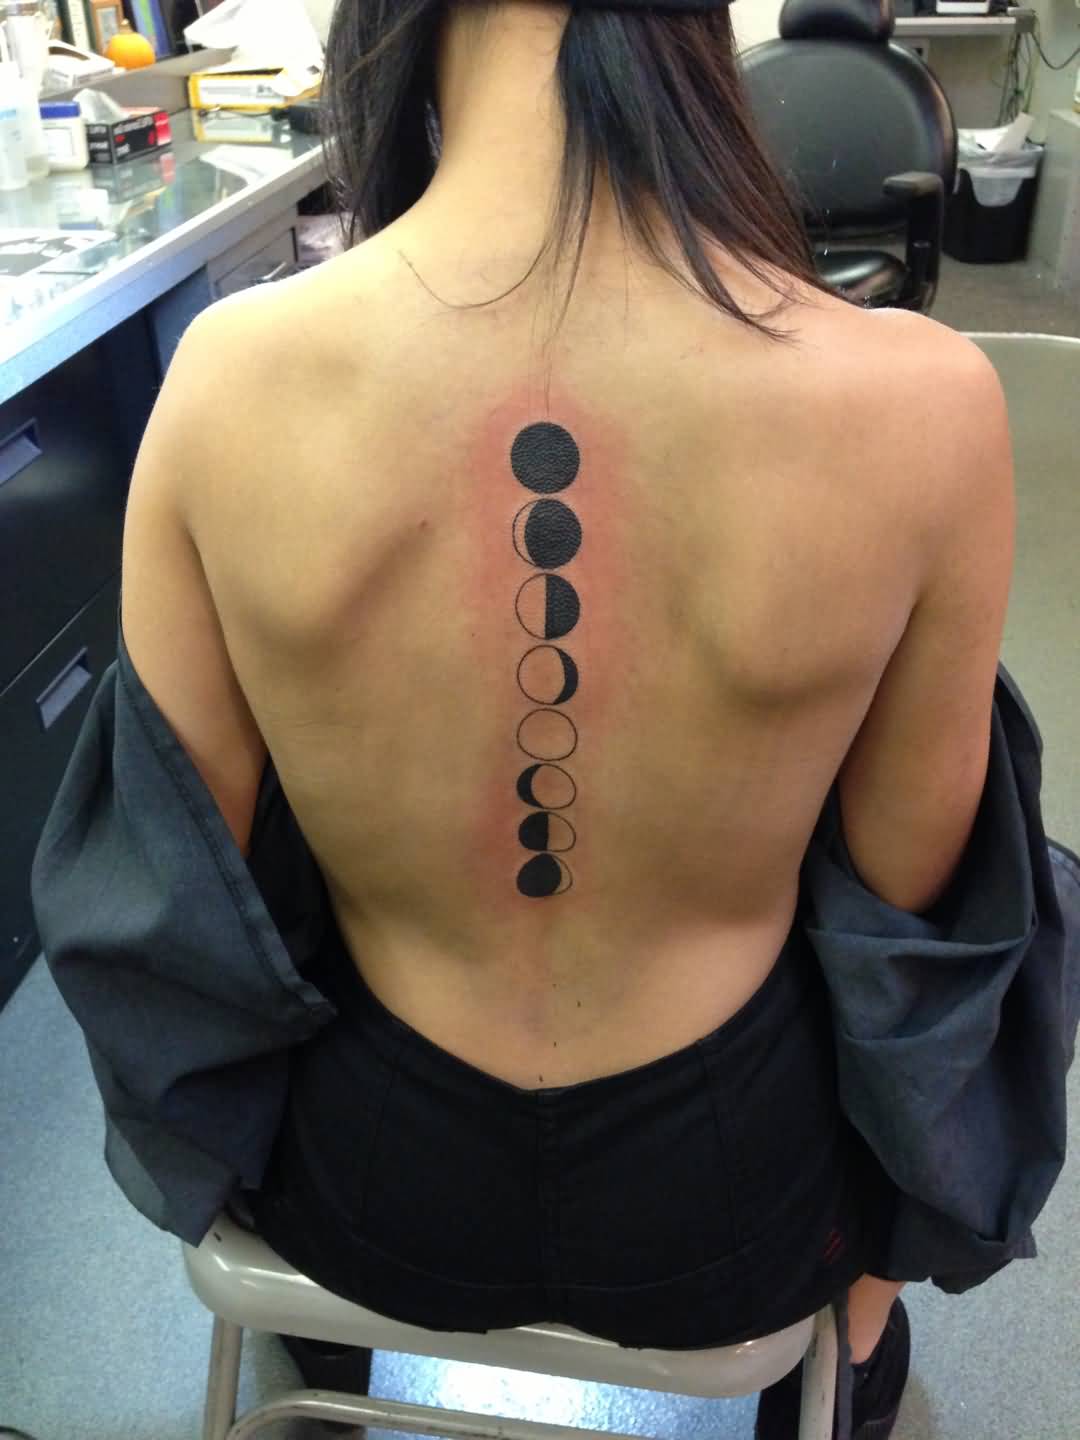 Phases Of The Moon Tattoo On Girl Upper Back